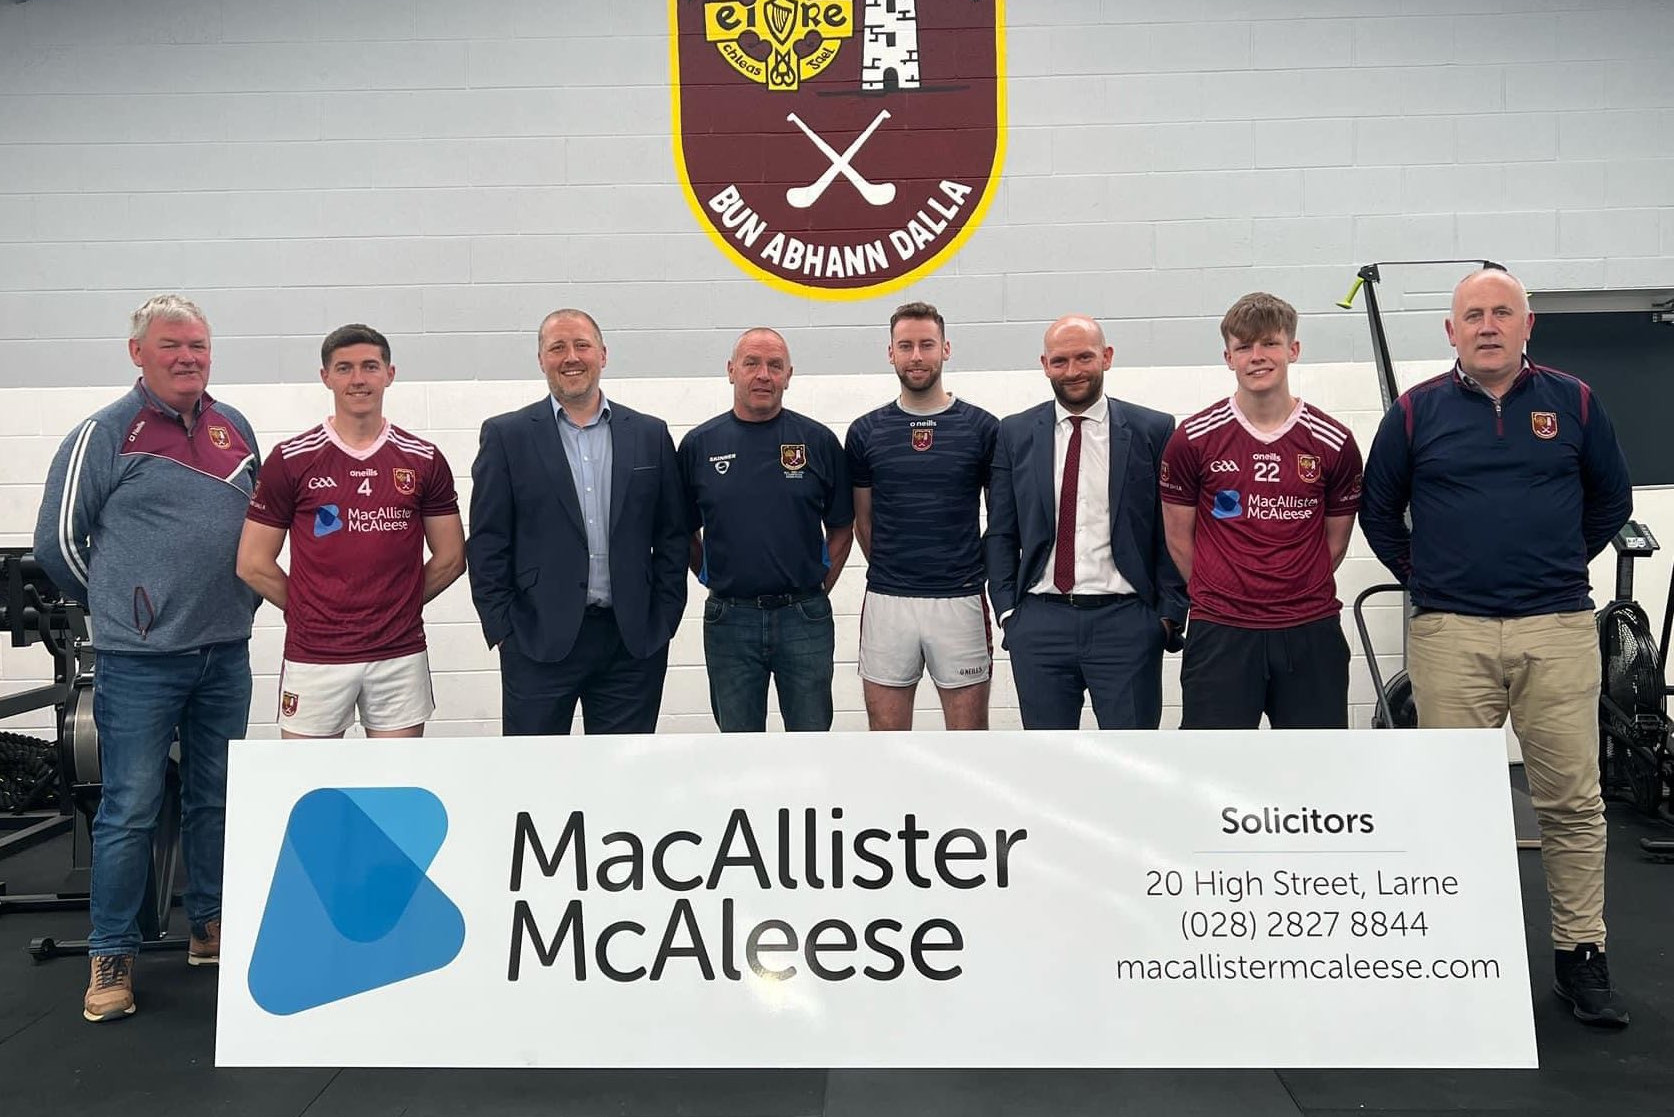 #InPictures: MacAllister McAleese partners with Ruairí Óg